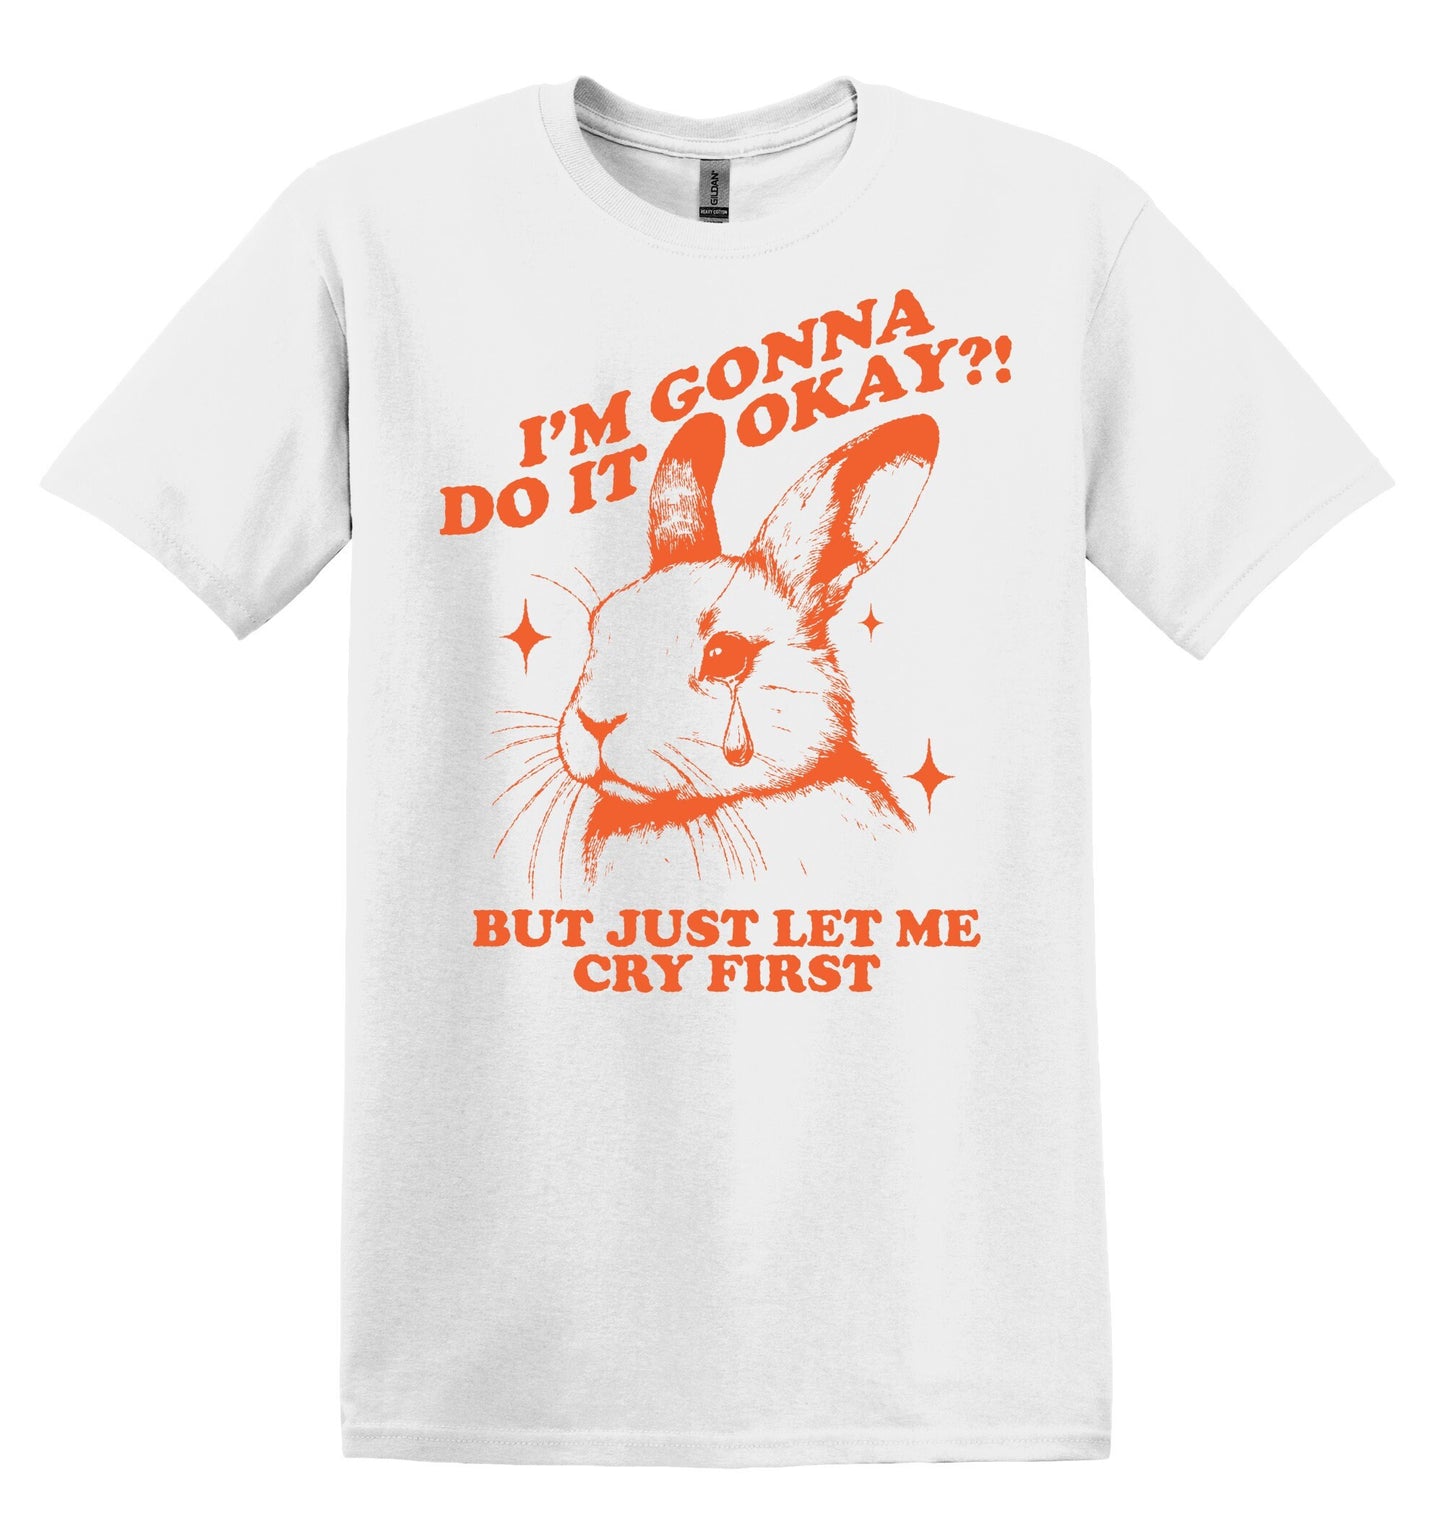 I'm Gonna do it Okay? But Just Let Me Cry First TShirt Graphic Shirt Retro Adult Shirt Vintage T-Shirt Nostalgia T-Shirt Relaxed Cotton Tee